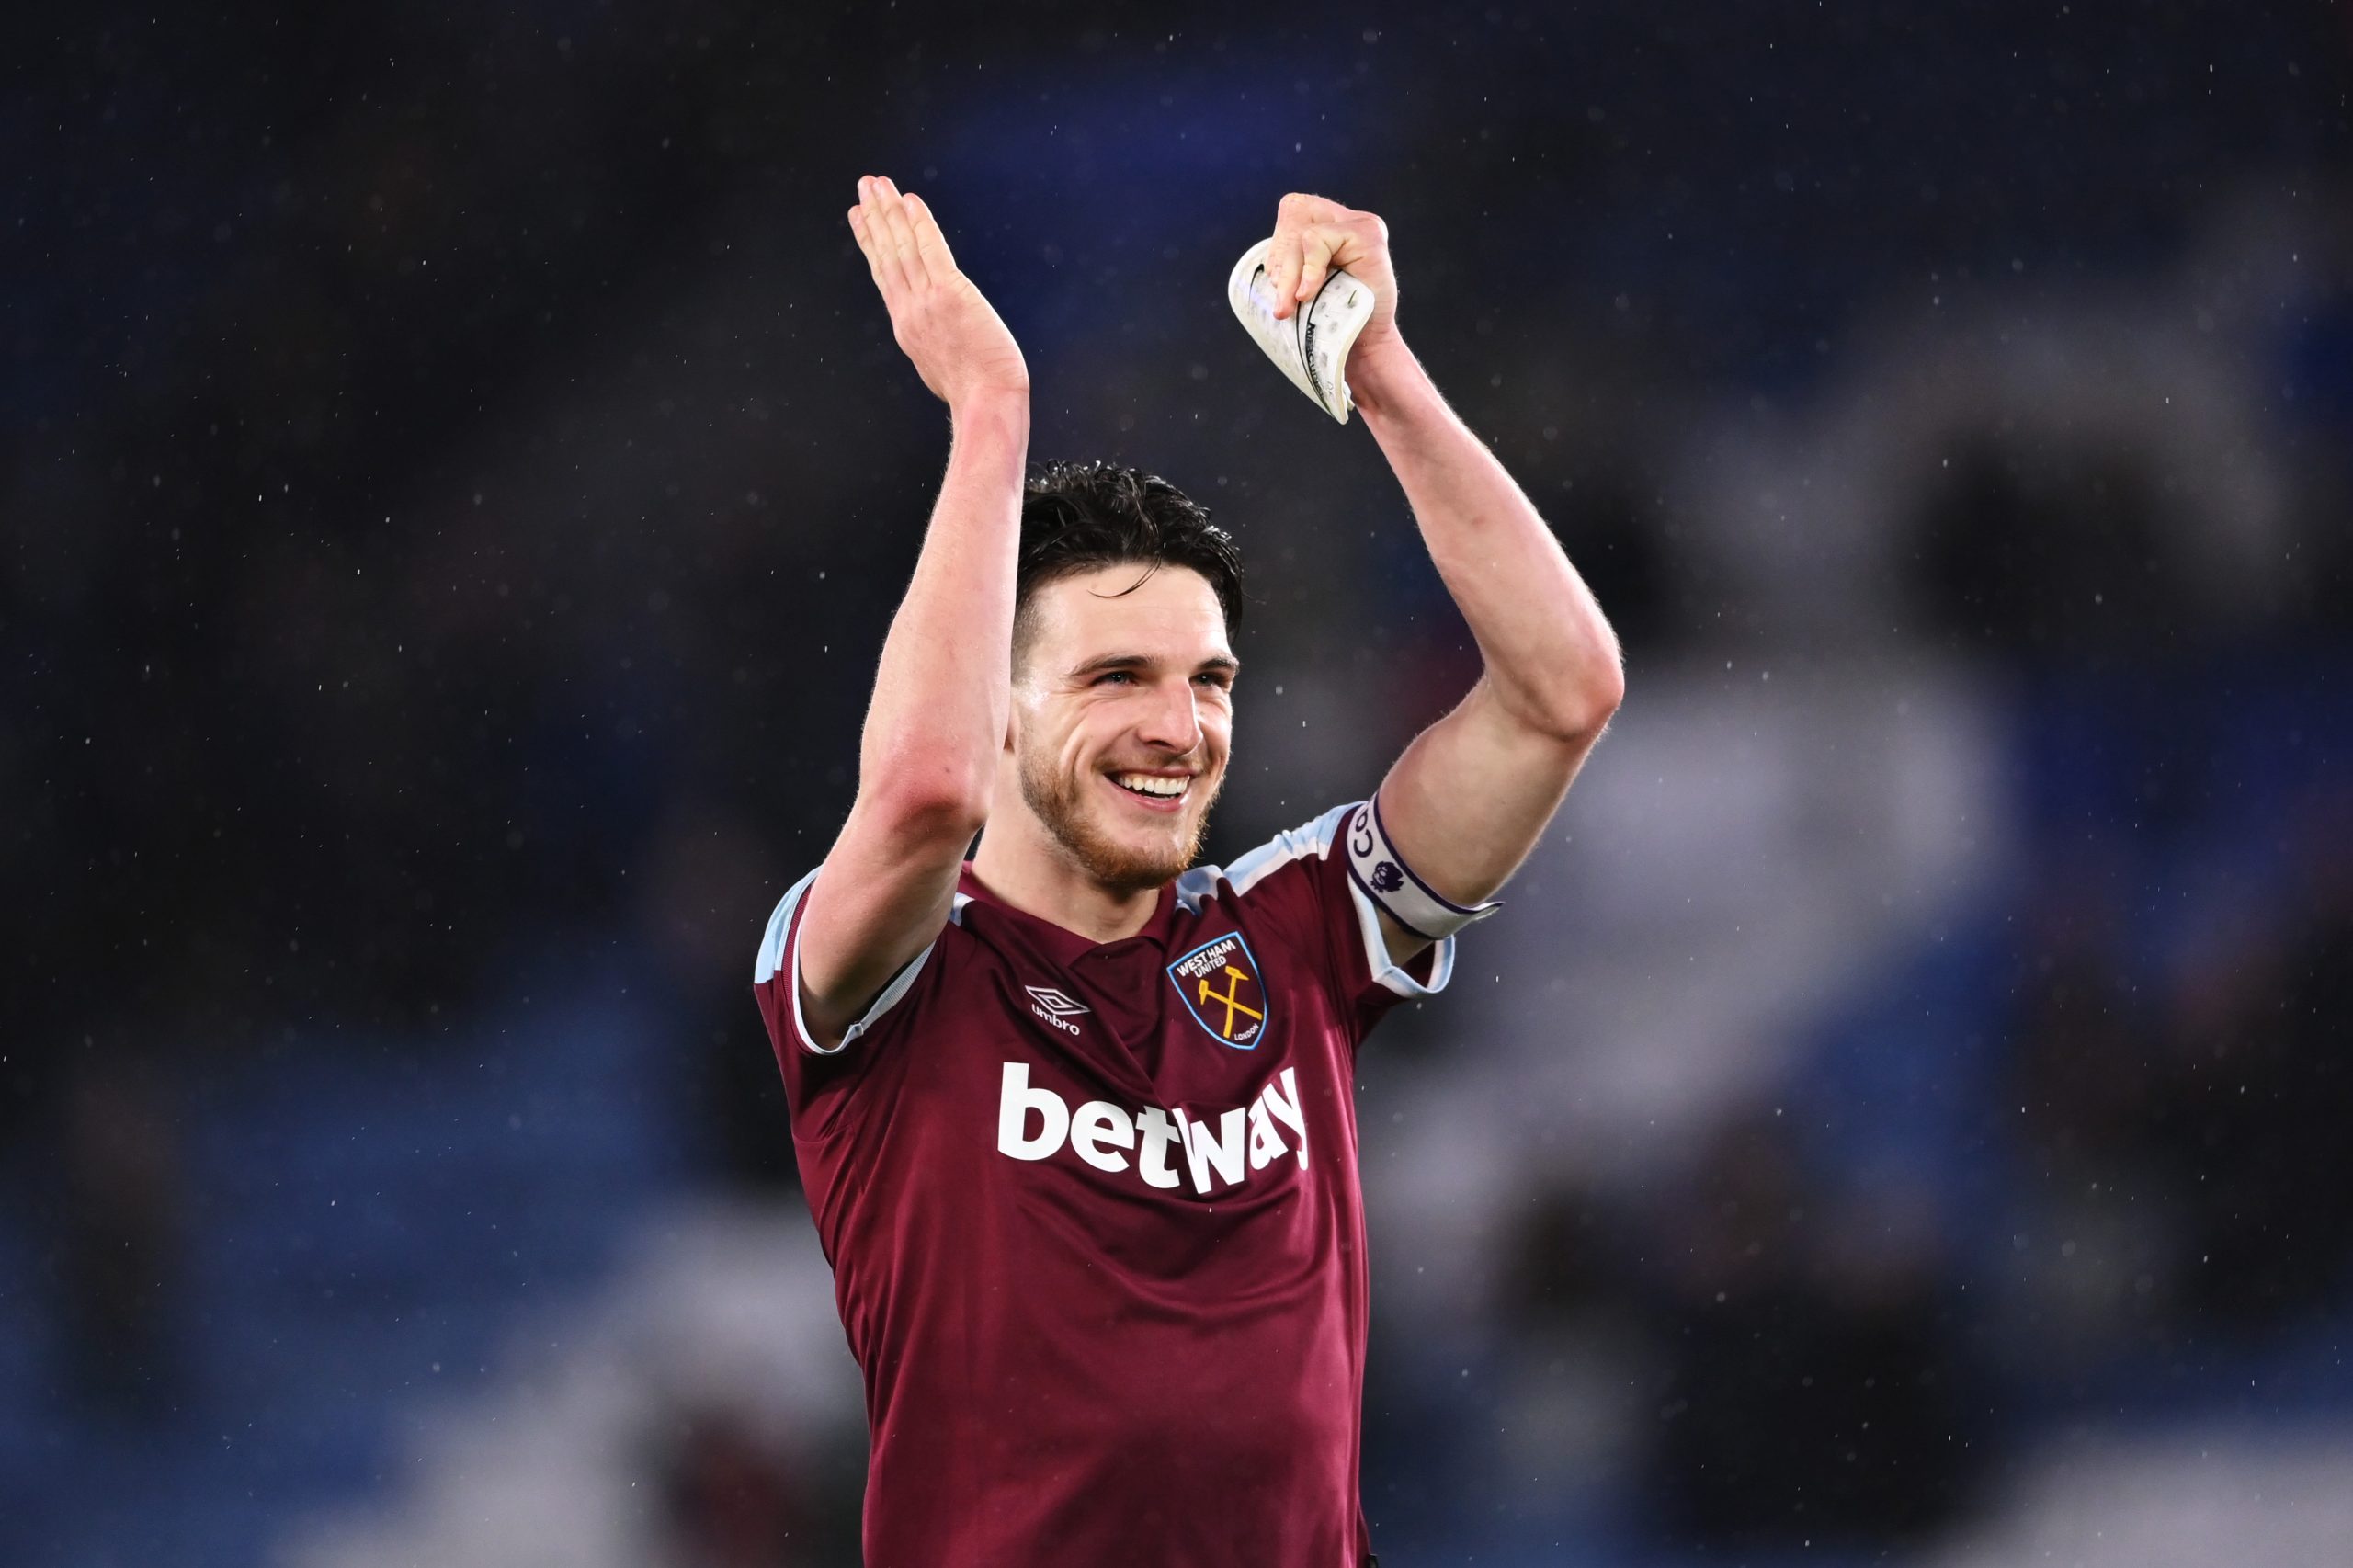 Chelsea are keen on signing Declan Rice. (Photo by Laurence Griffiths/Getty Images)